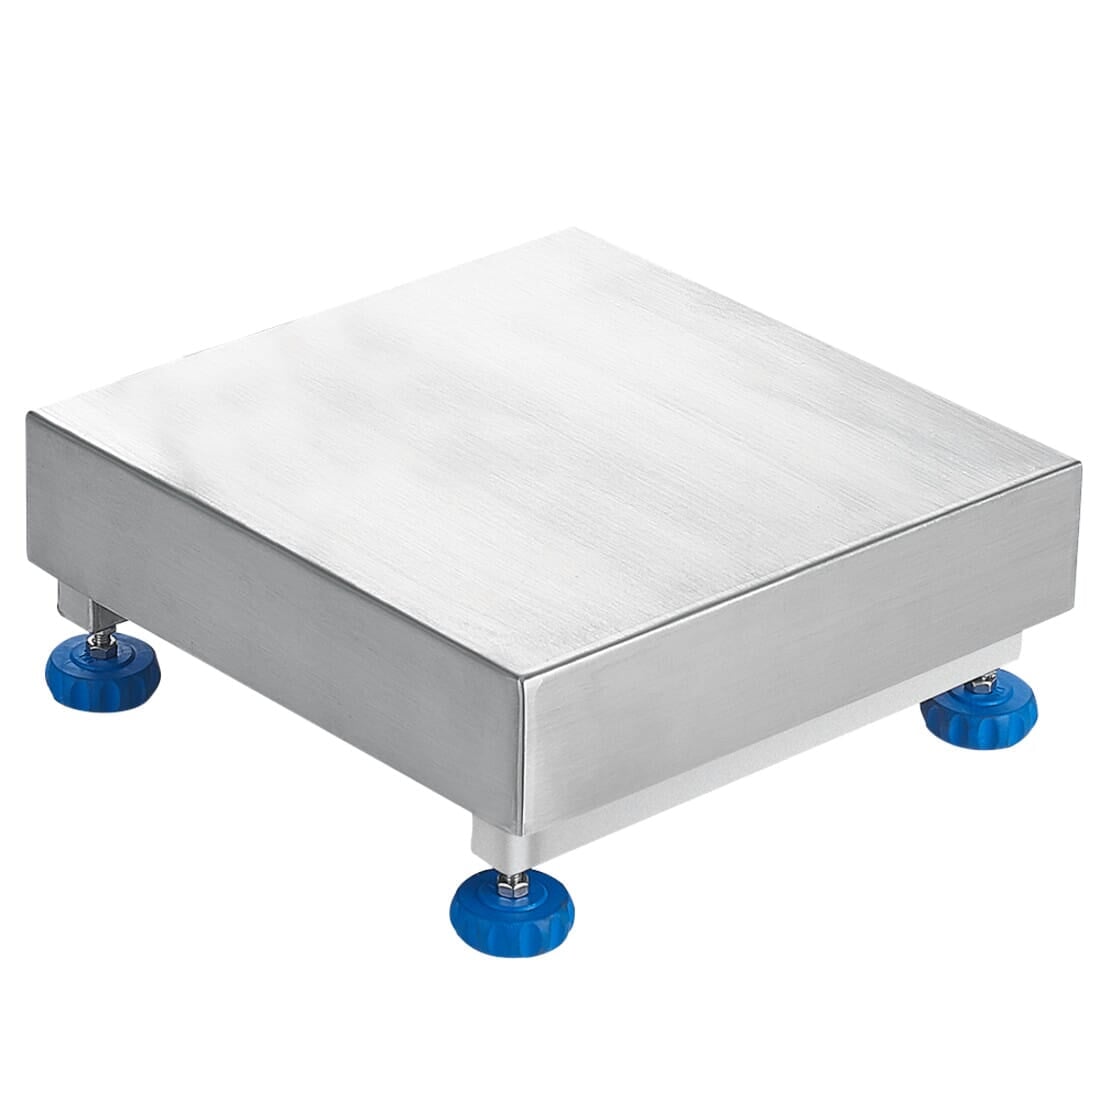 Adam Equipment WF 150AM W Series Approved Stainless Steel Platforms NTEP, 60000 g X 10 g